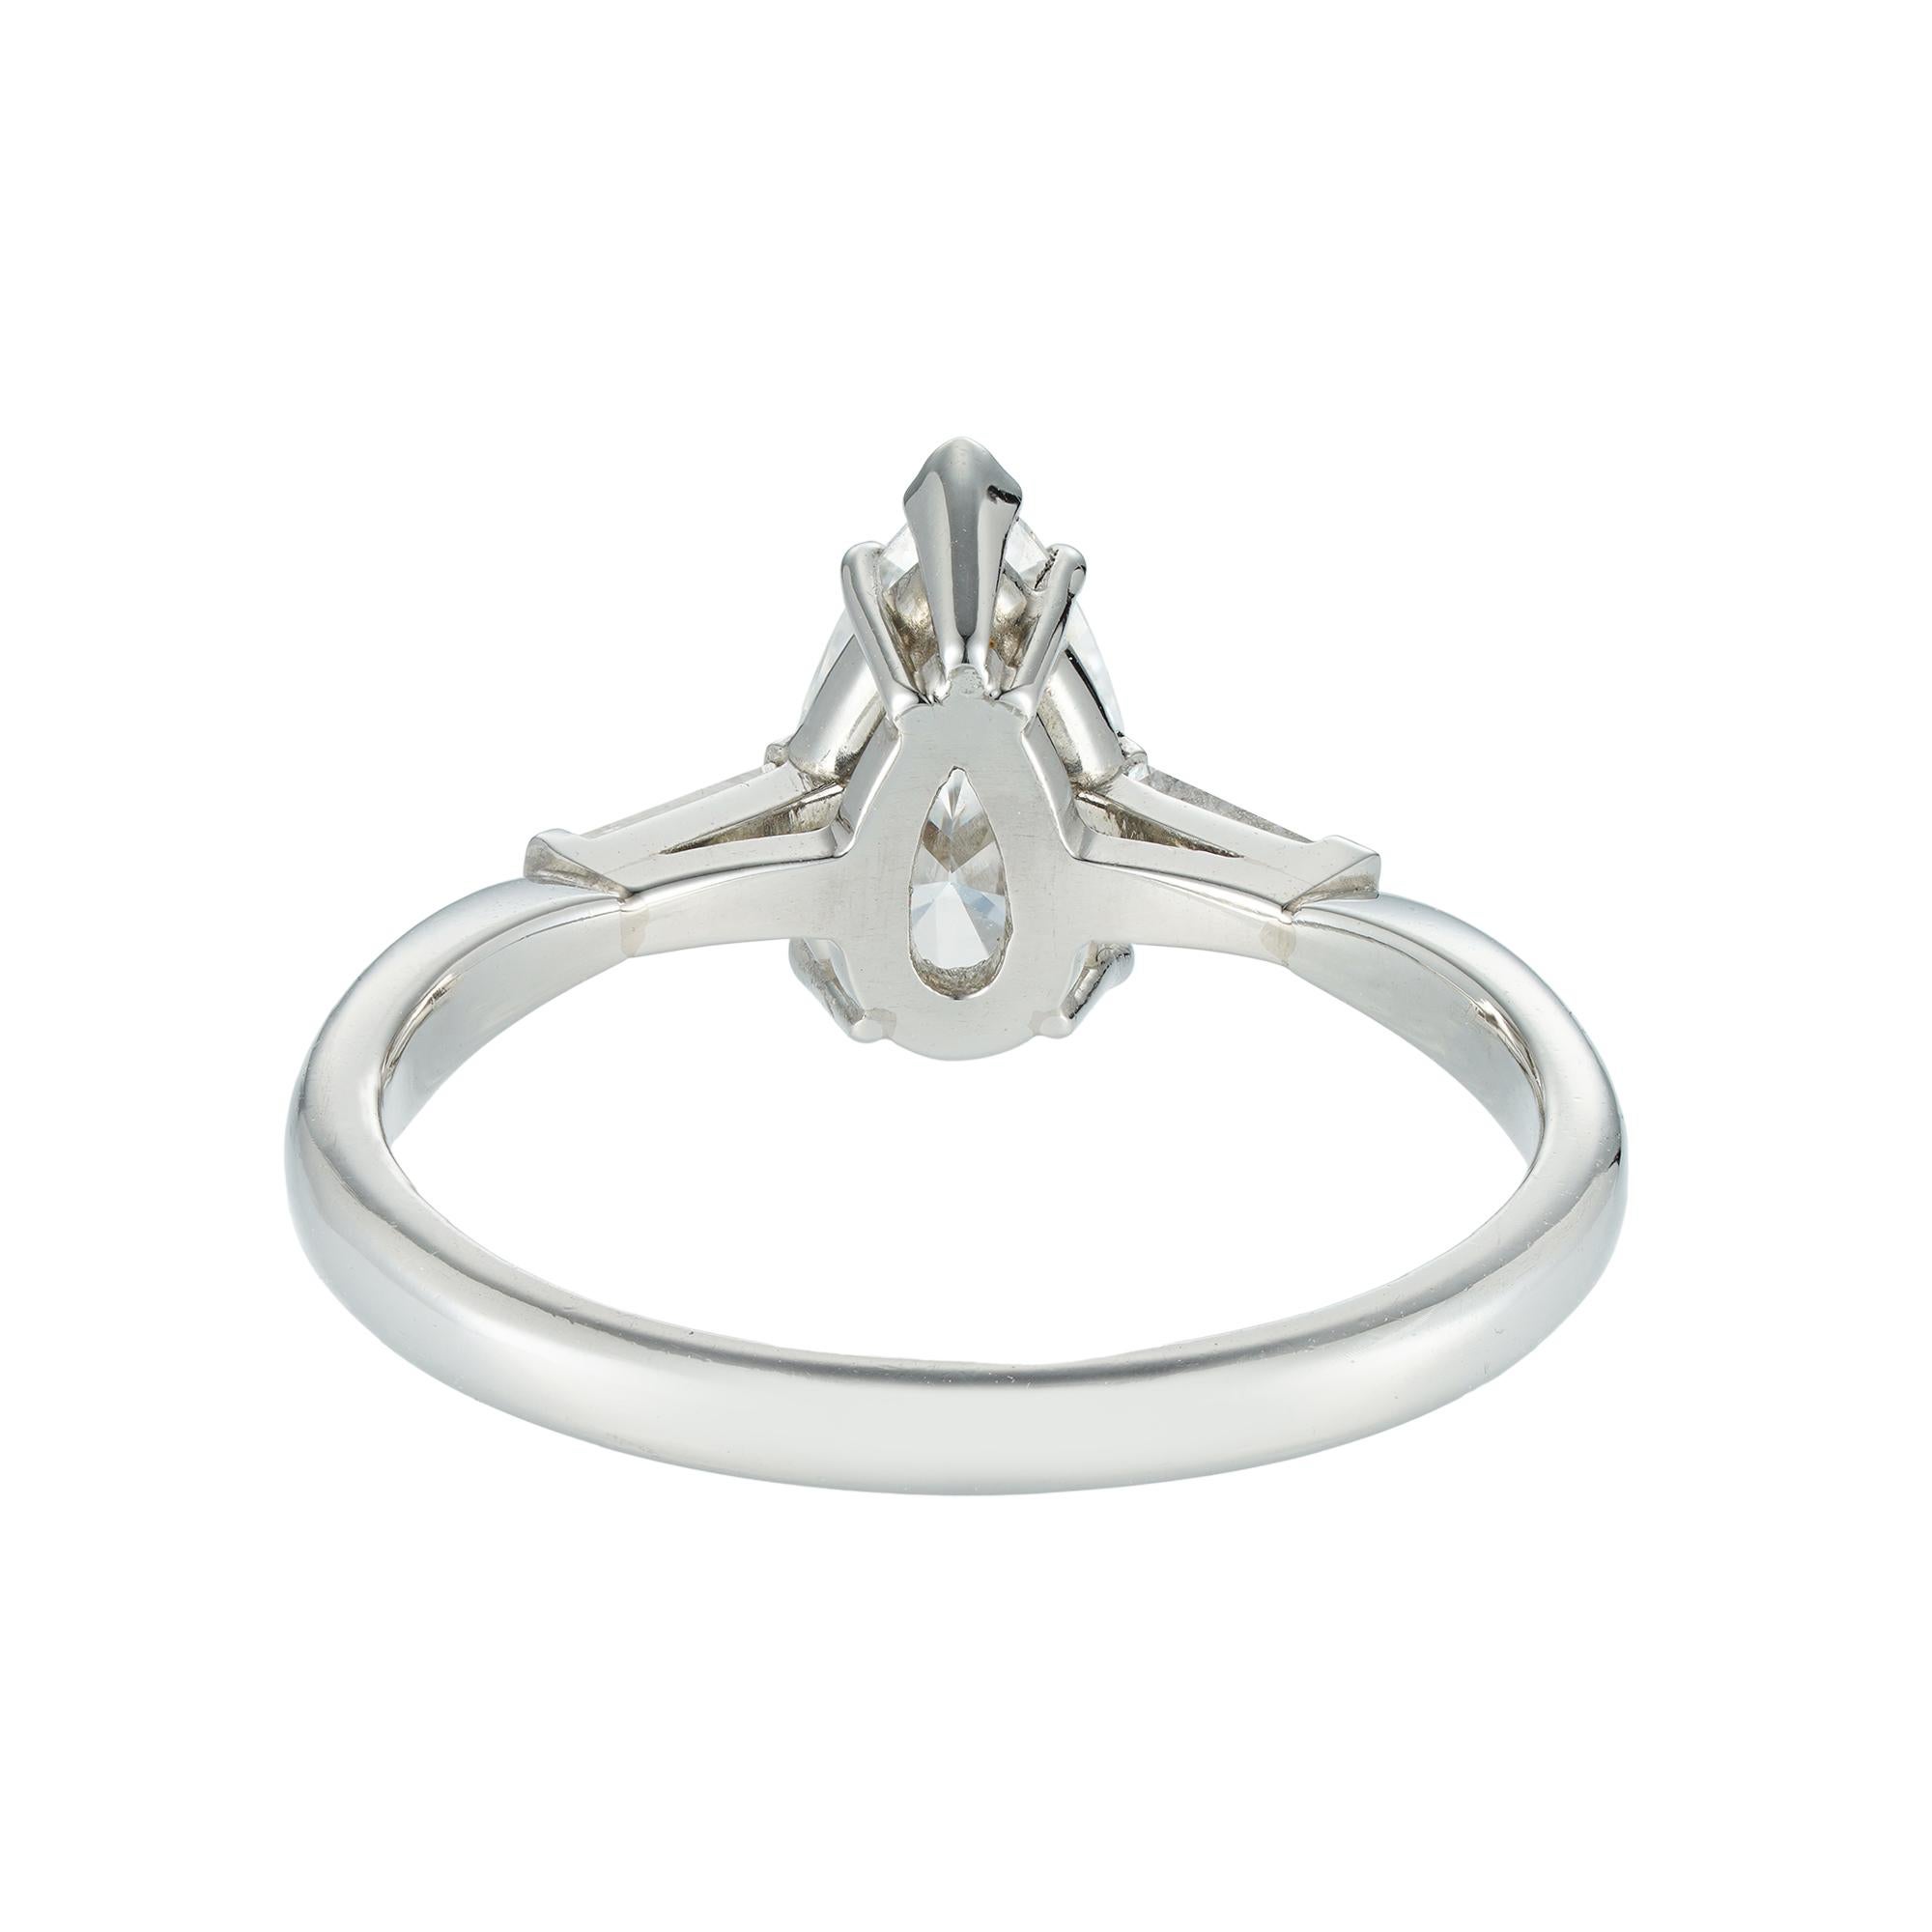 Pear Cut Certified 1.06 Carat Solitaire Diamond Ring